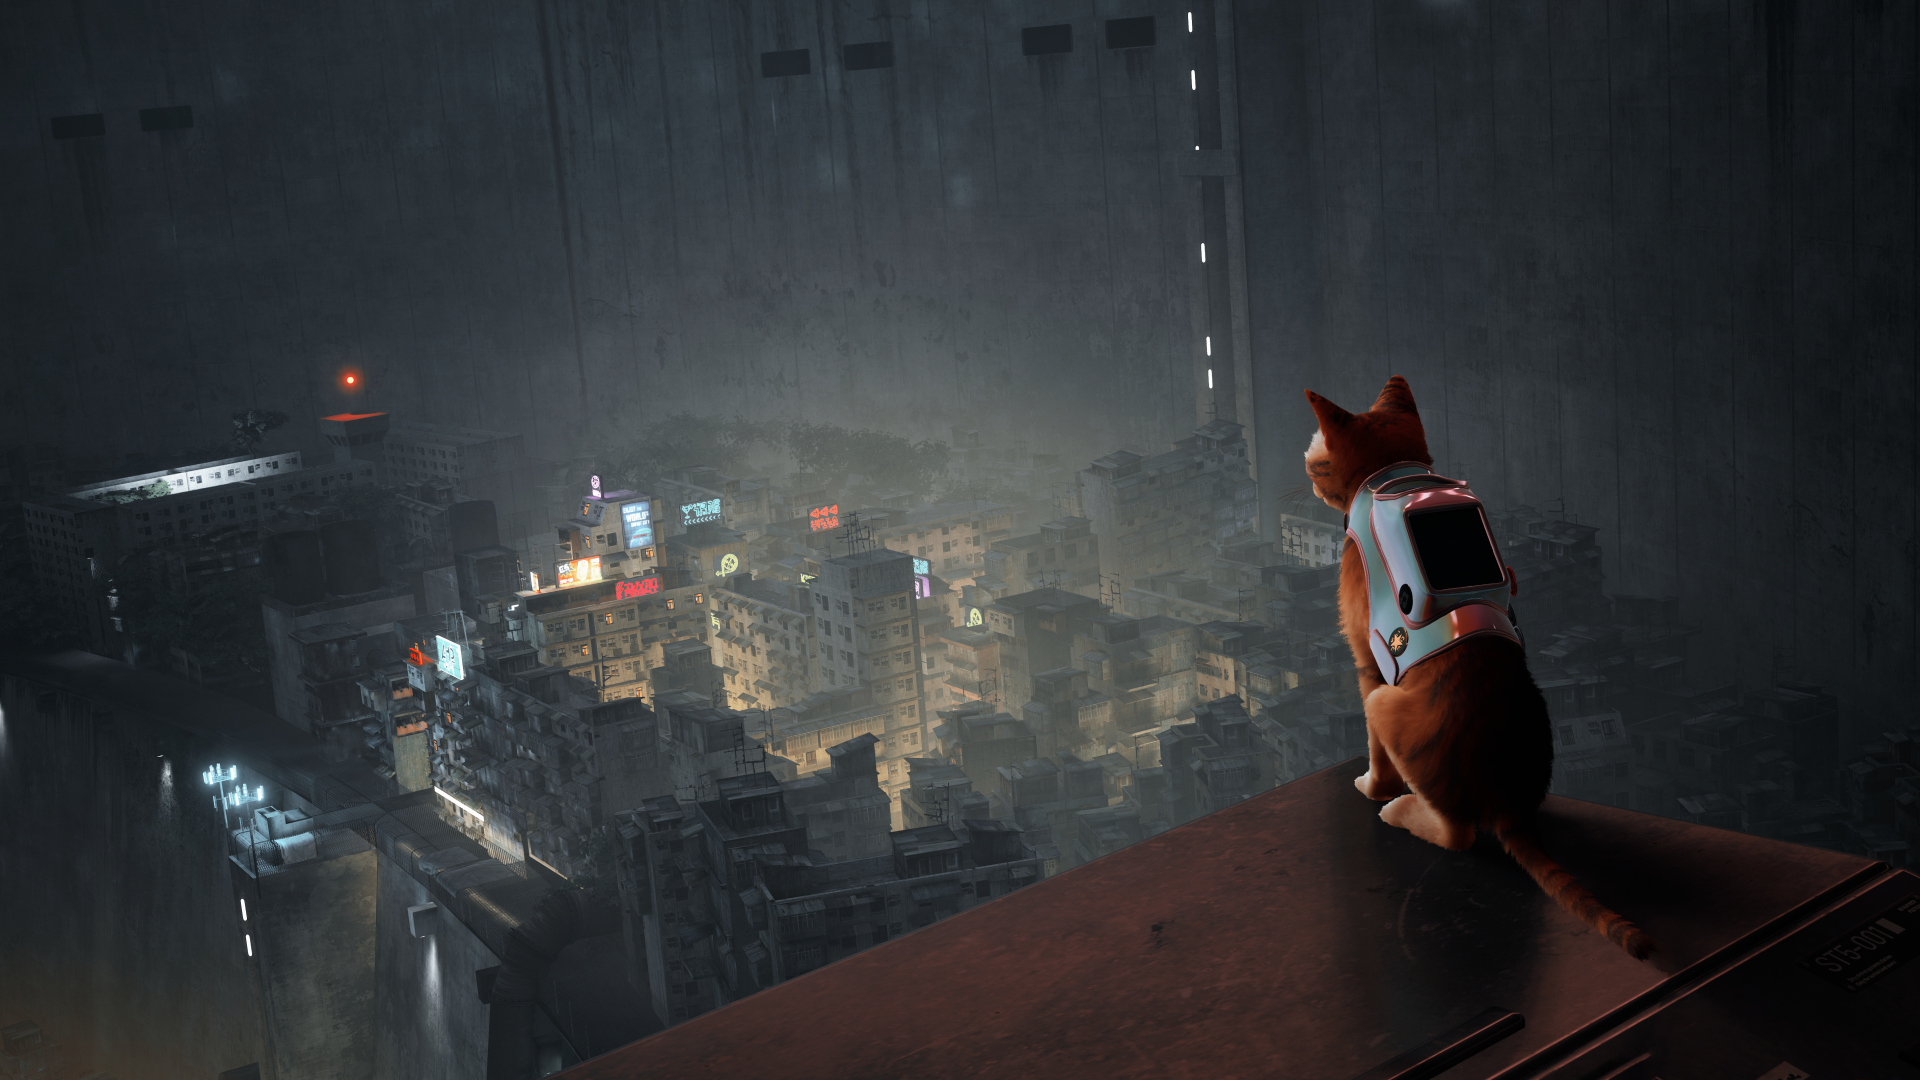 stray on pc download free